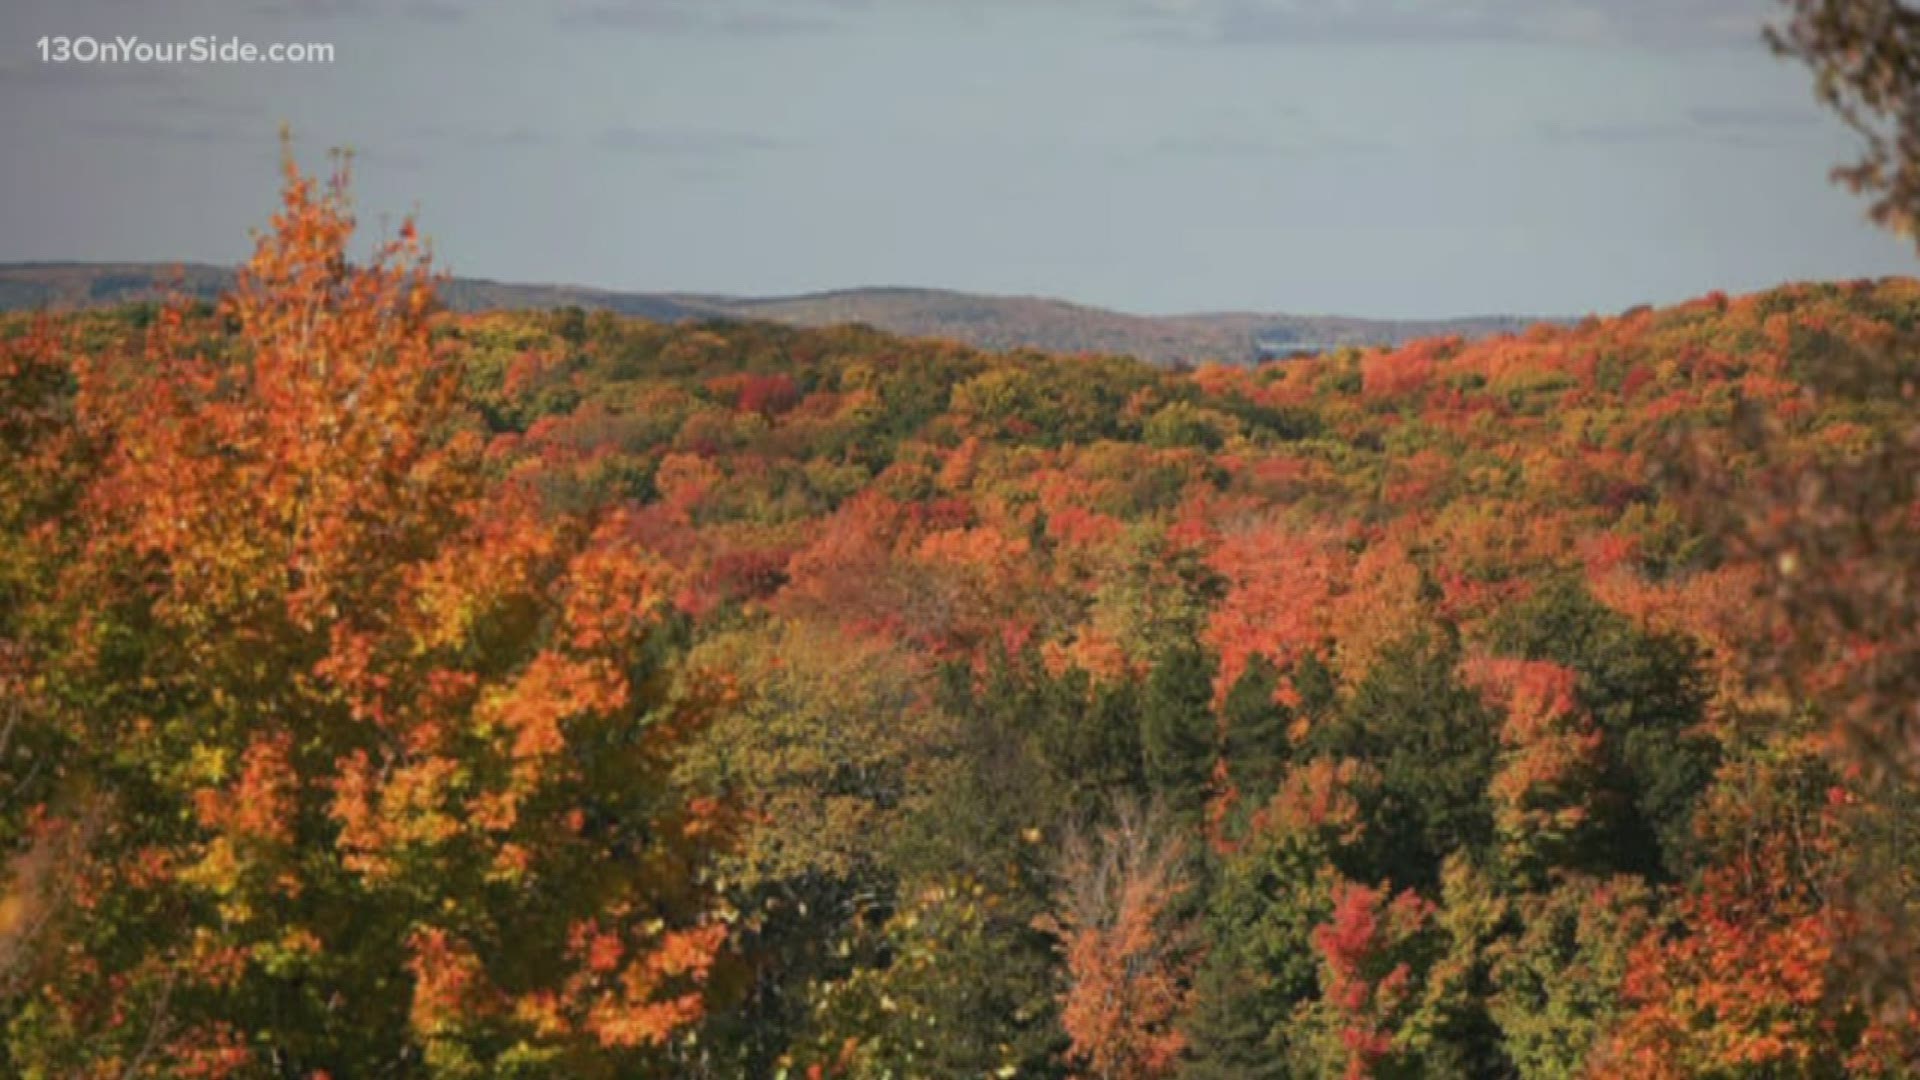 The Manistee County Visitors Bureau has created a fall 2019 color guide for the best places to see what Michigan's fall foliage has to offer.